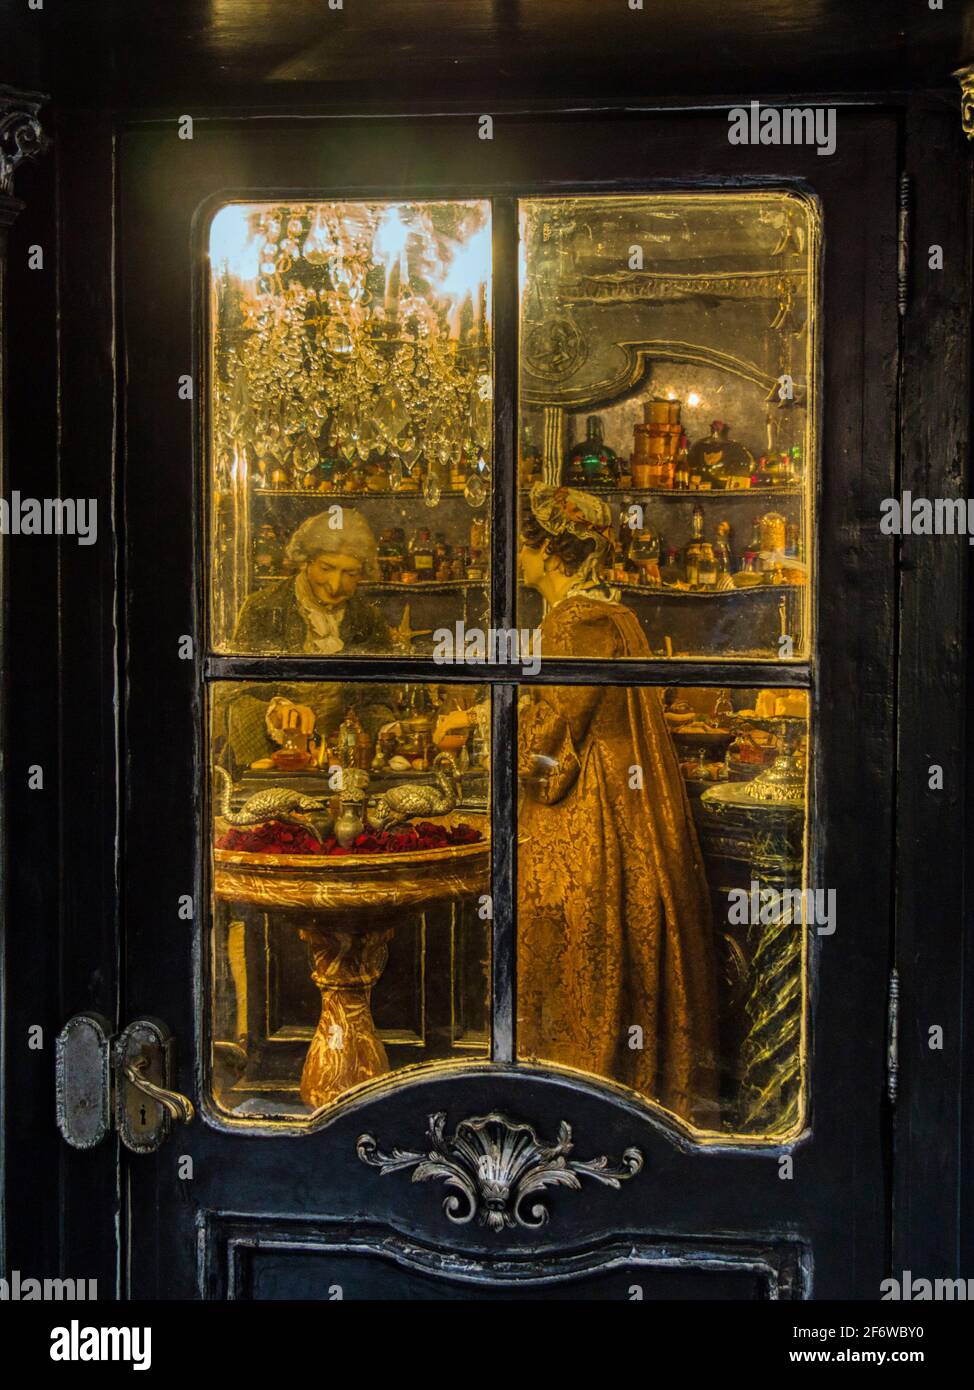 props from the set of the movie Le Parfum, Story of a Murderer, Musee des  miniatures et decors du cinema, Lyon, France Stock Photo - Alamy